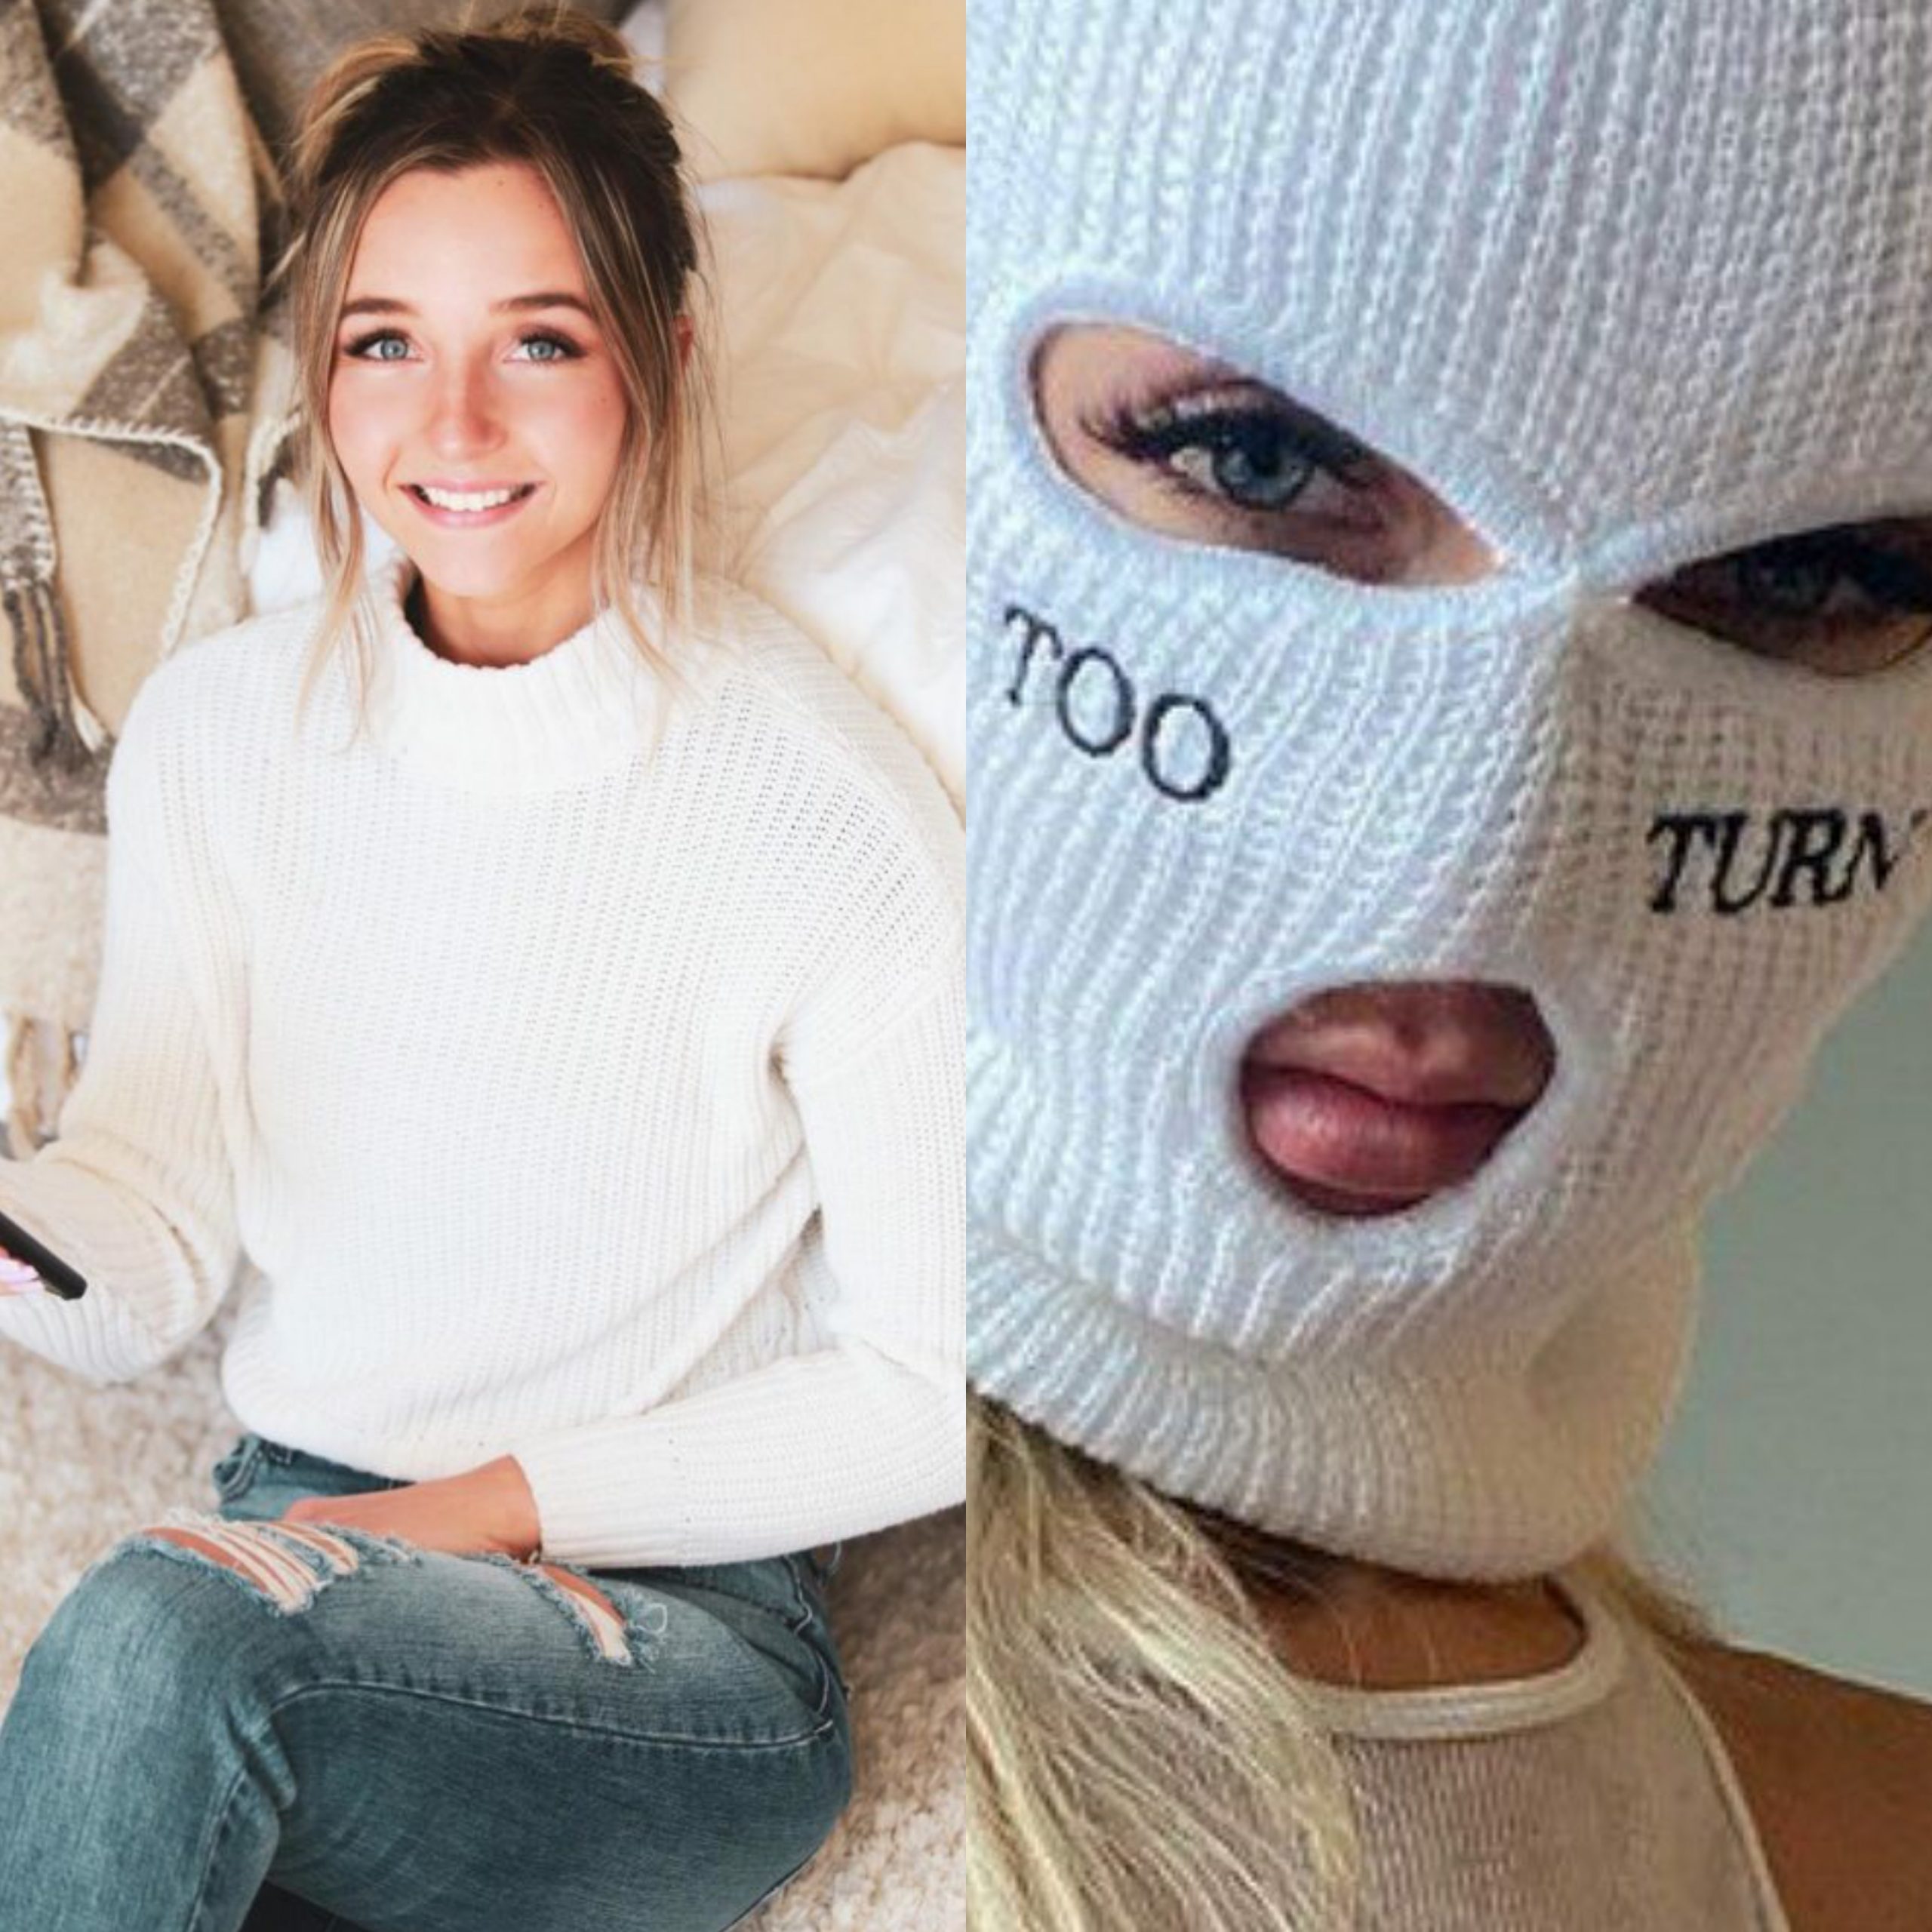 T huren Of later Who is 'TheSkiMaskGirl' on Tiktok? We Have A Face Reveal - The Teal Mango